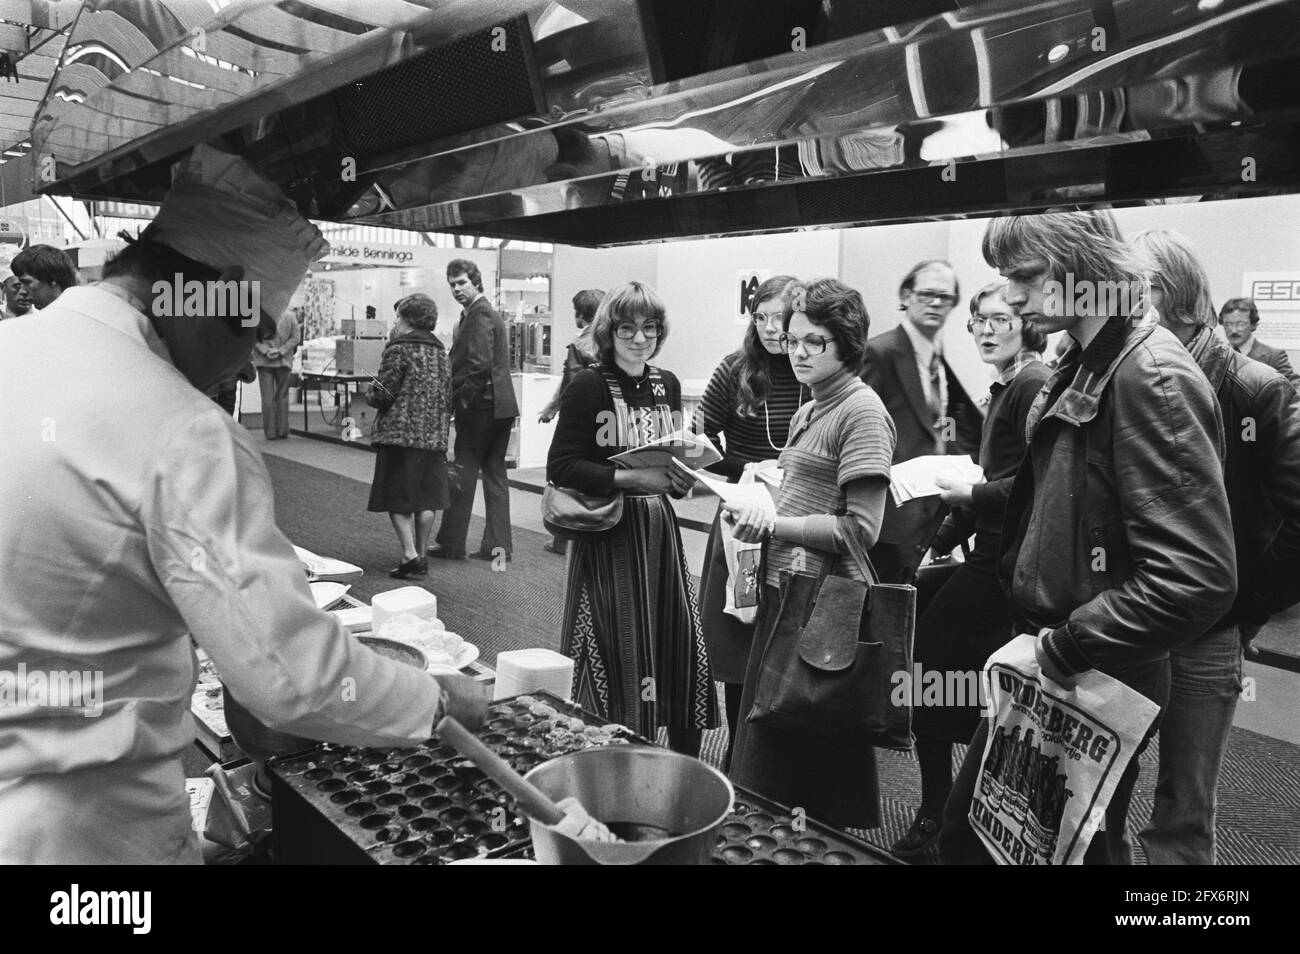 Horecava in the RAI, January 10, 1977, trade fairs, The Netherlands, 20th century press agency photo, news to remember, documentary, historic photography 1945-1990, visual stories, human history of the Twentieth Century, capturing moments in time Stock Photo